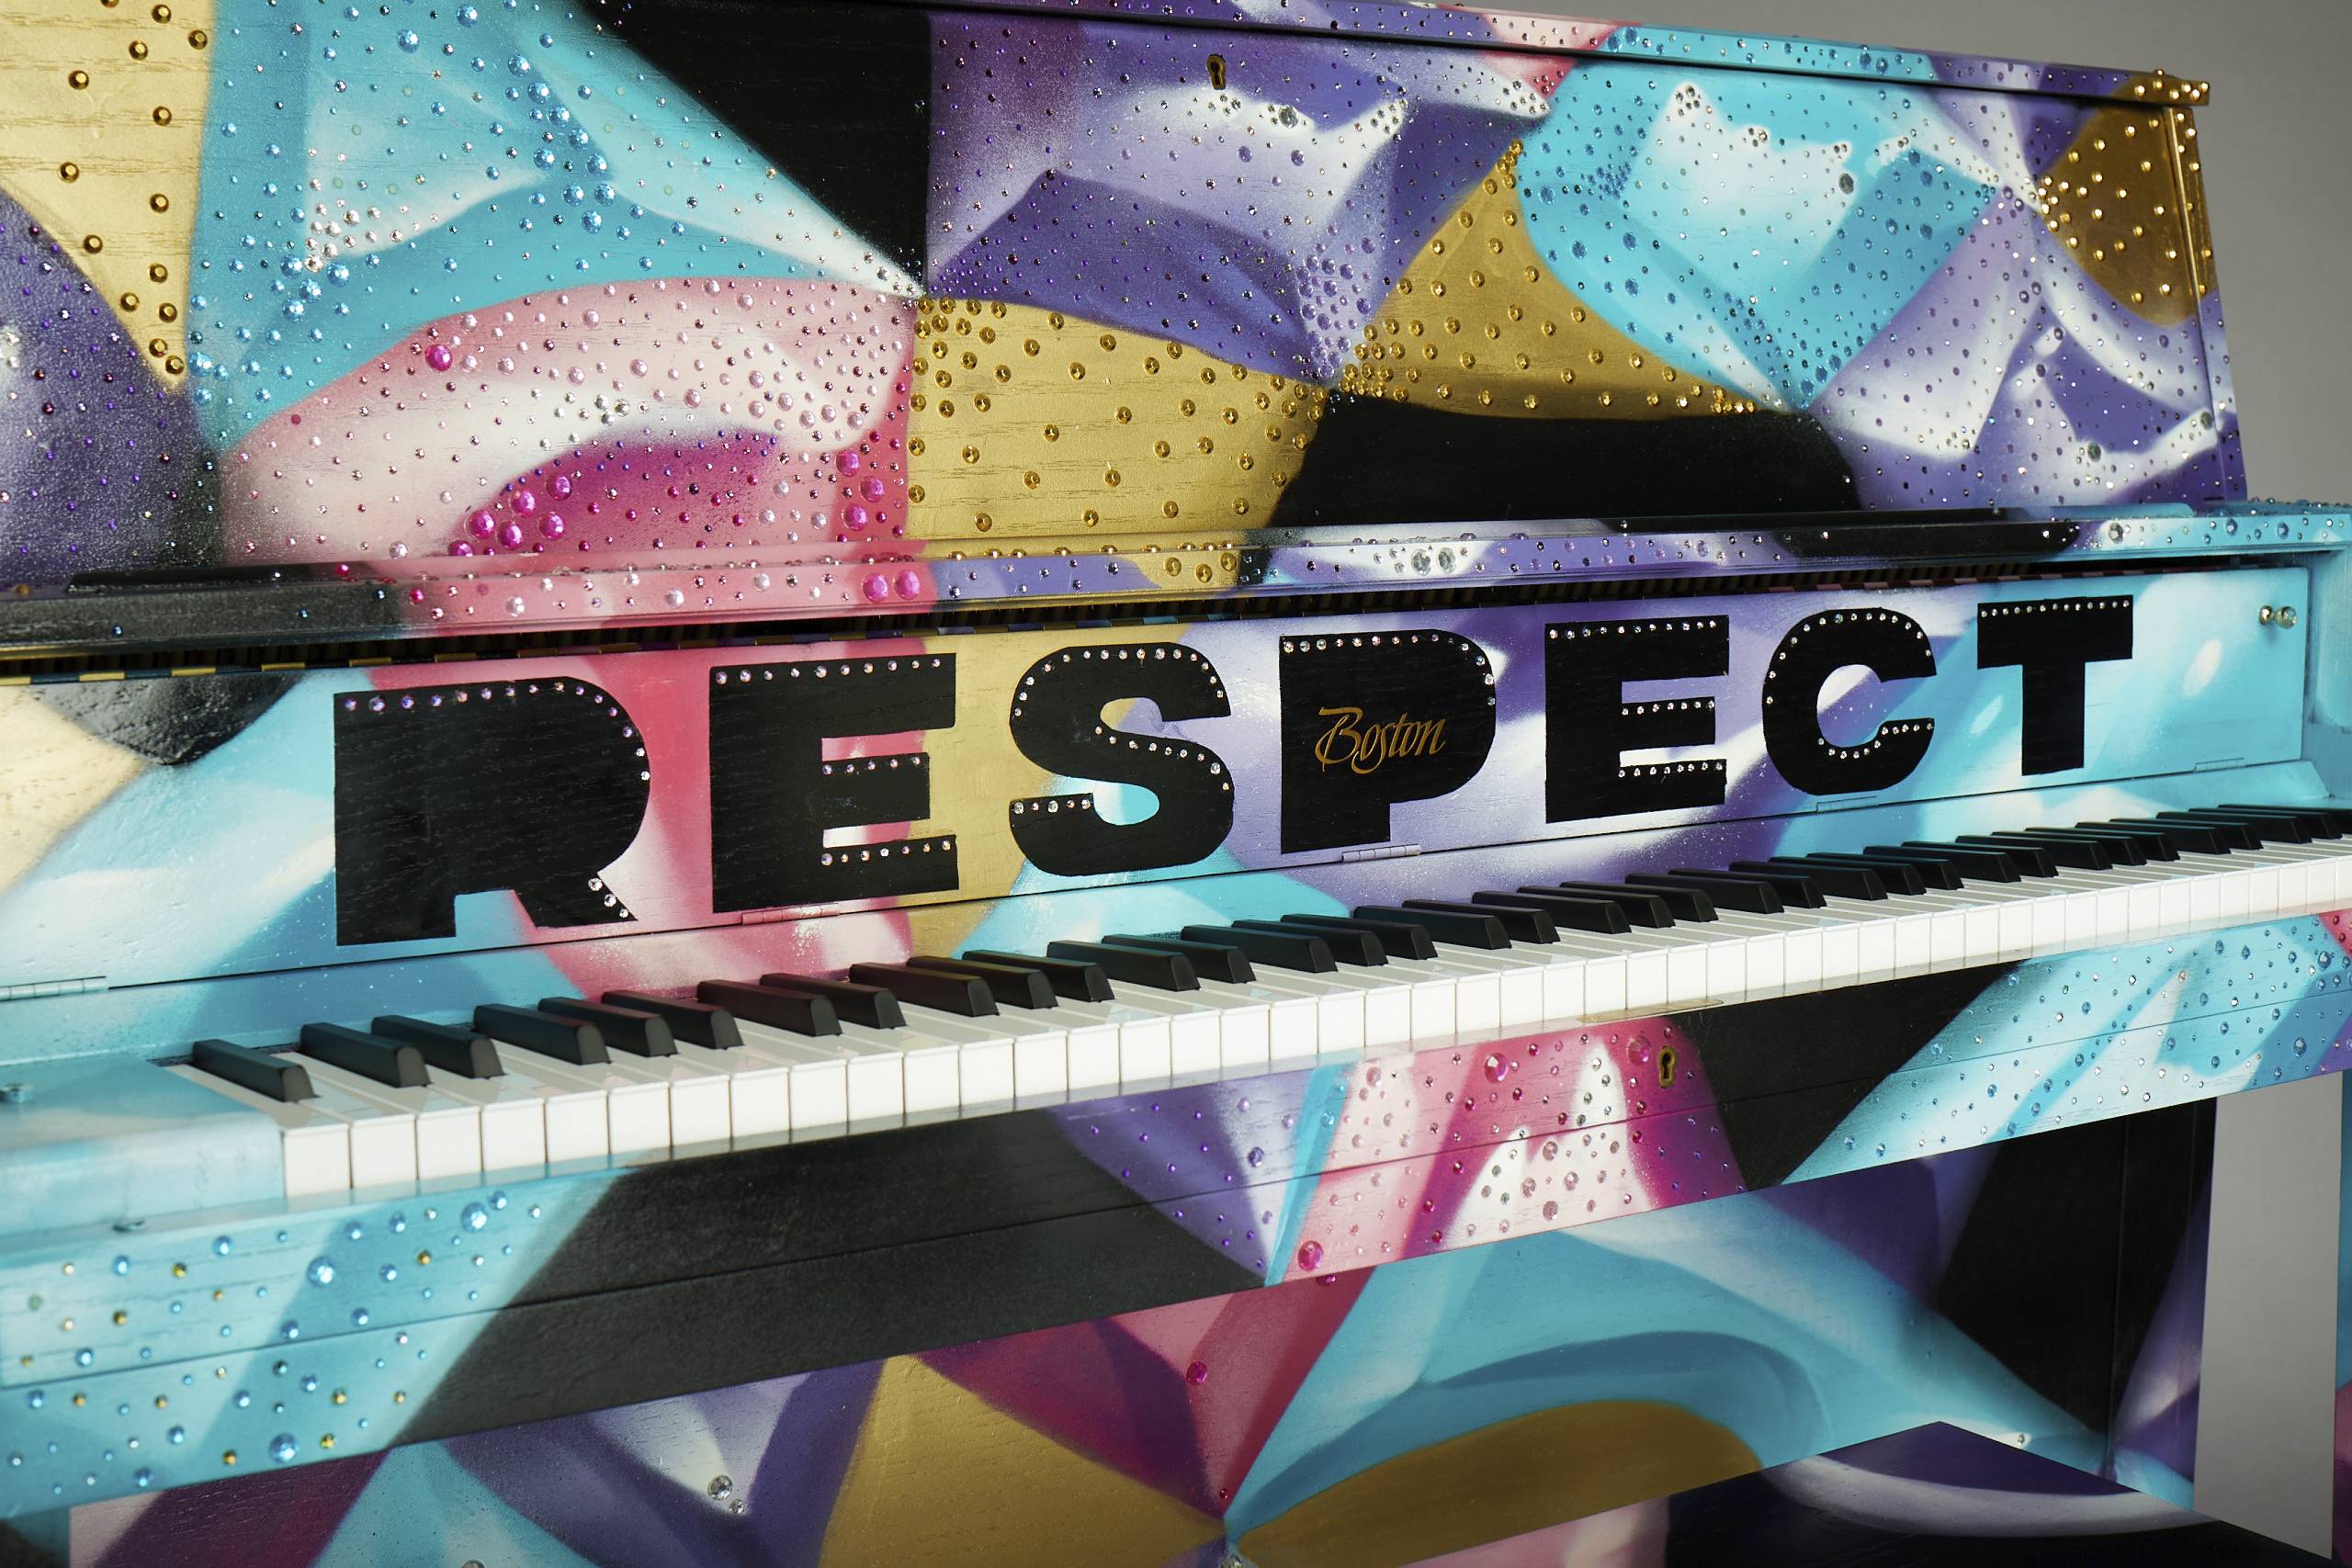 Respect-inspired "diva" piano by steinway